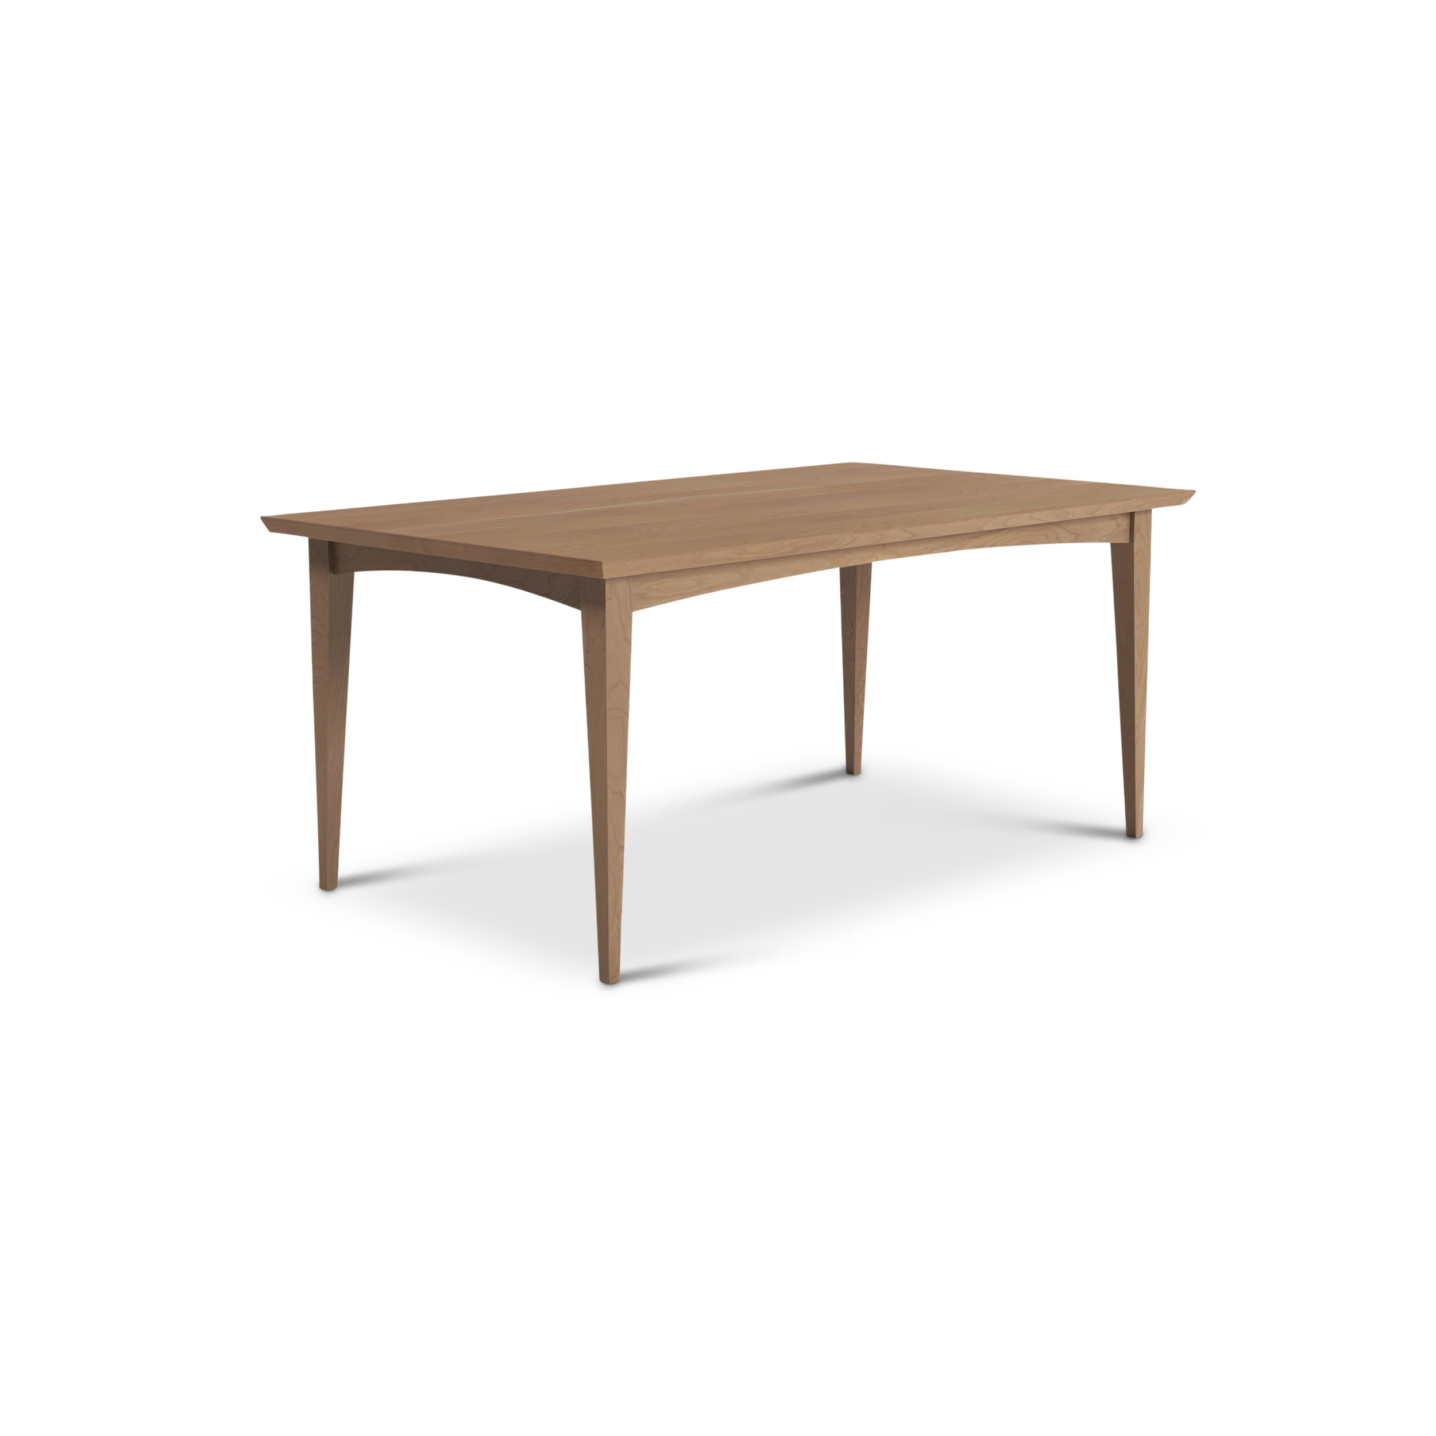 Solid Cherry Dining room table with tapered legs